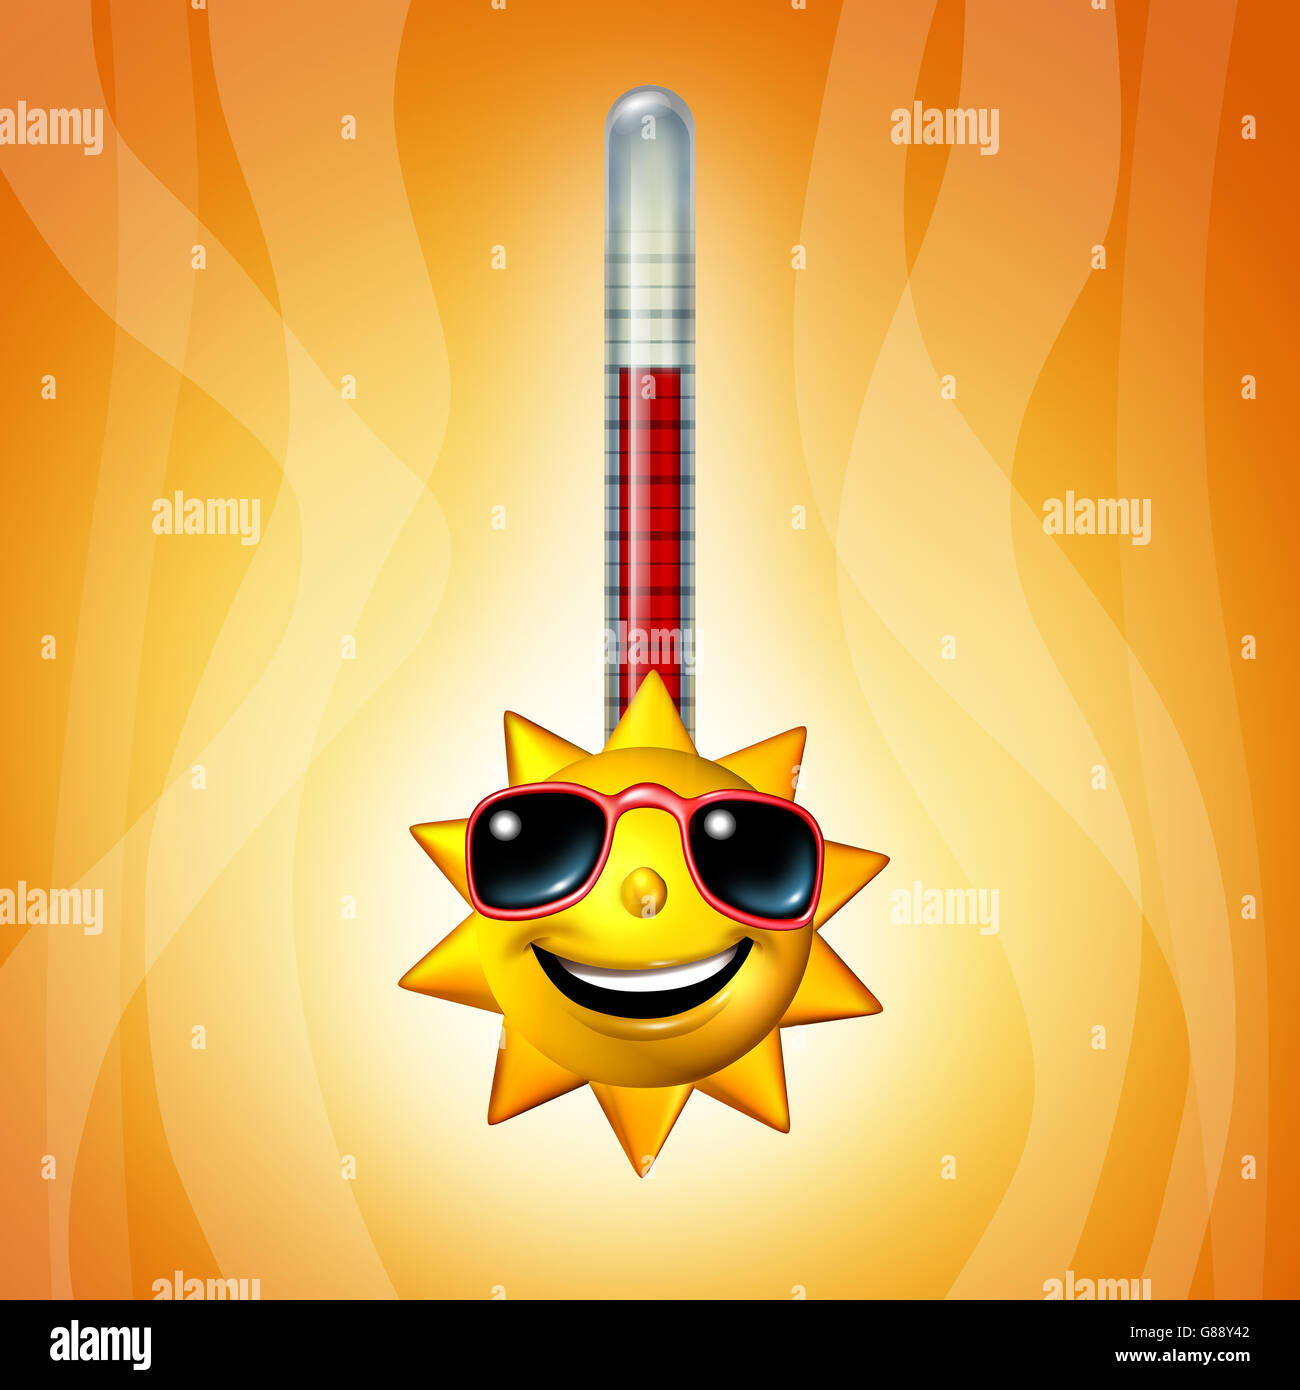 Hot sun thermometer temperature as a heat wave concept as a yellow character representing record breaking extreme hot weather symbol during summer season as a 3D illustration. Stock Photo